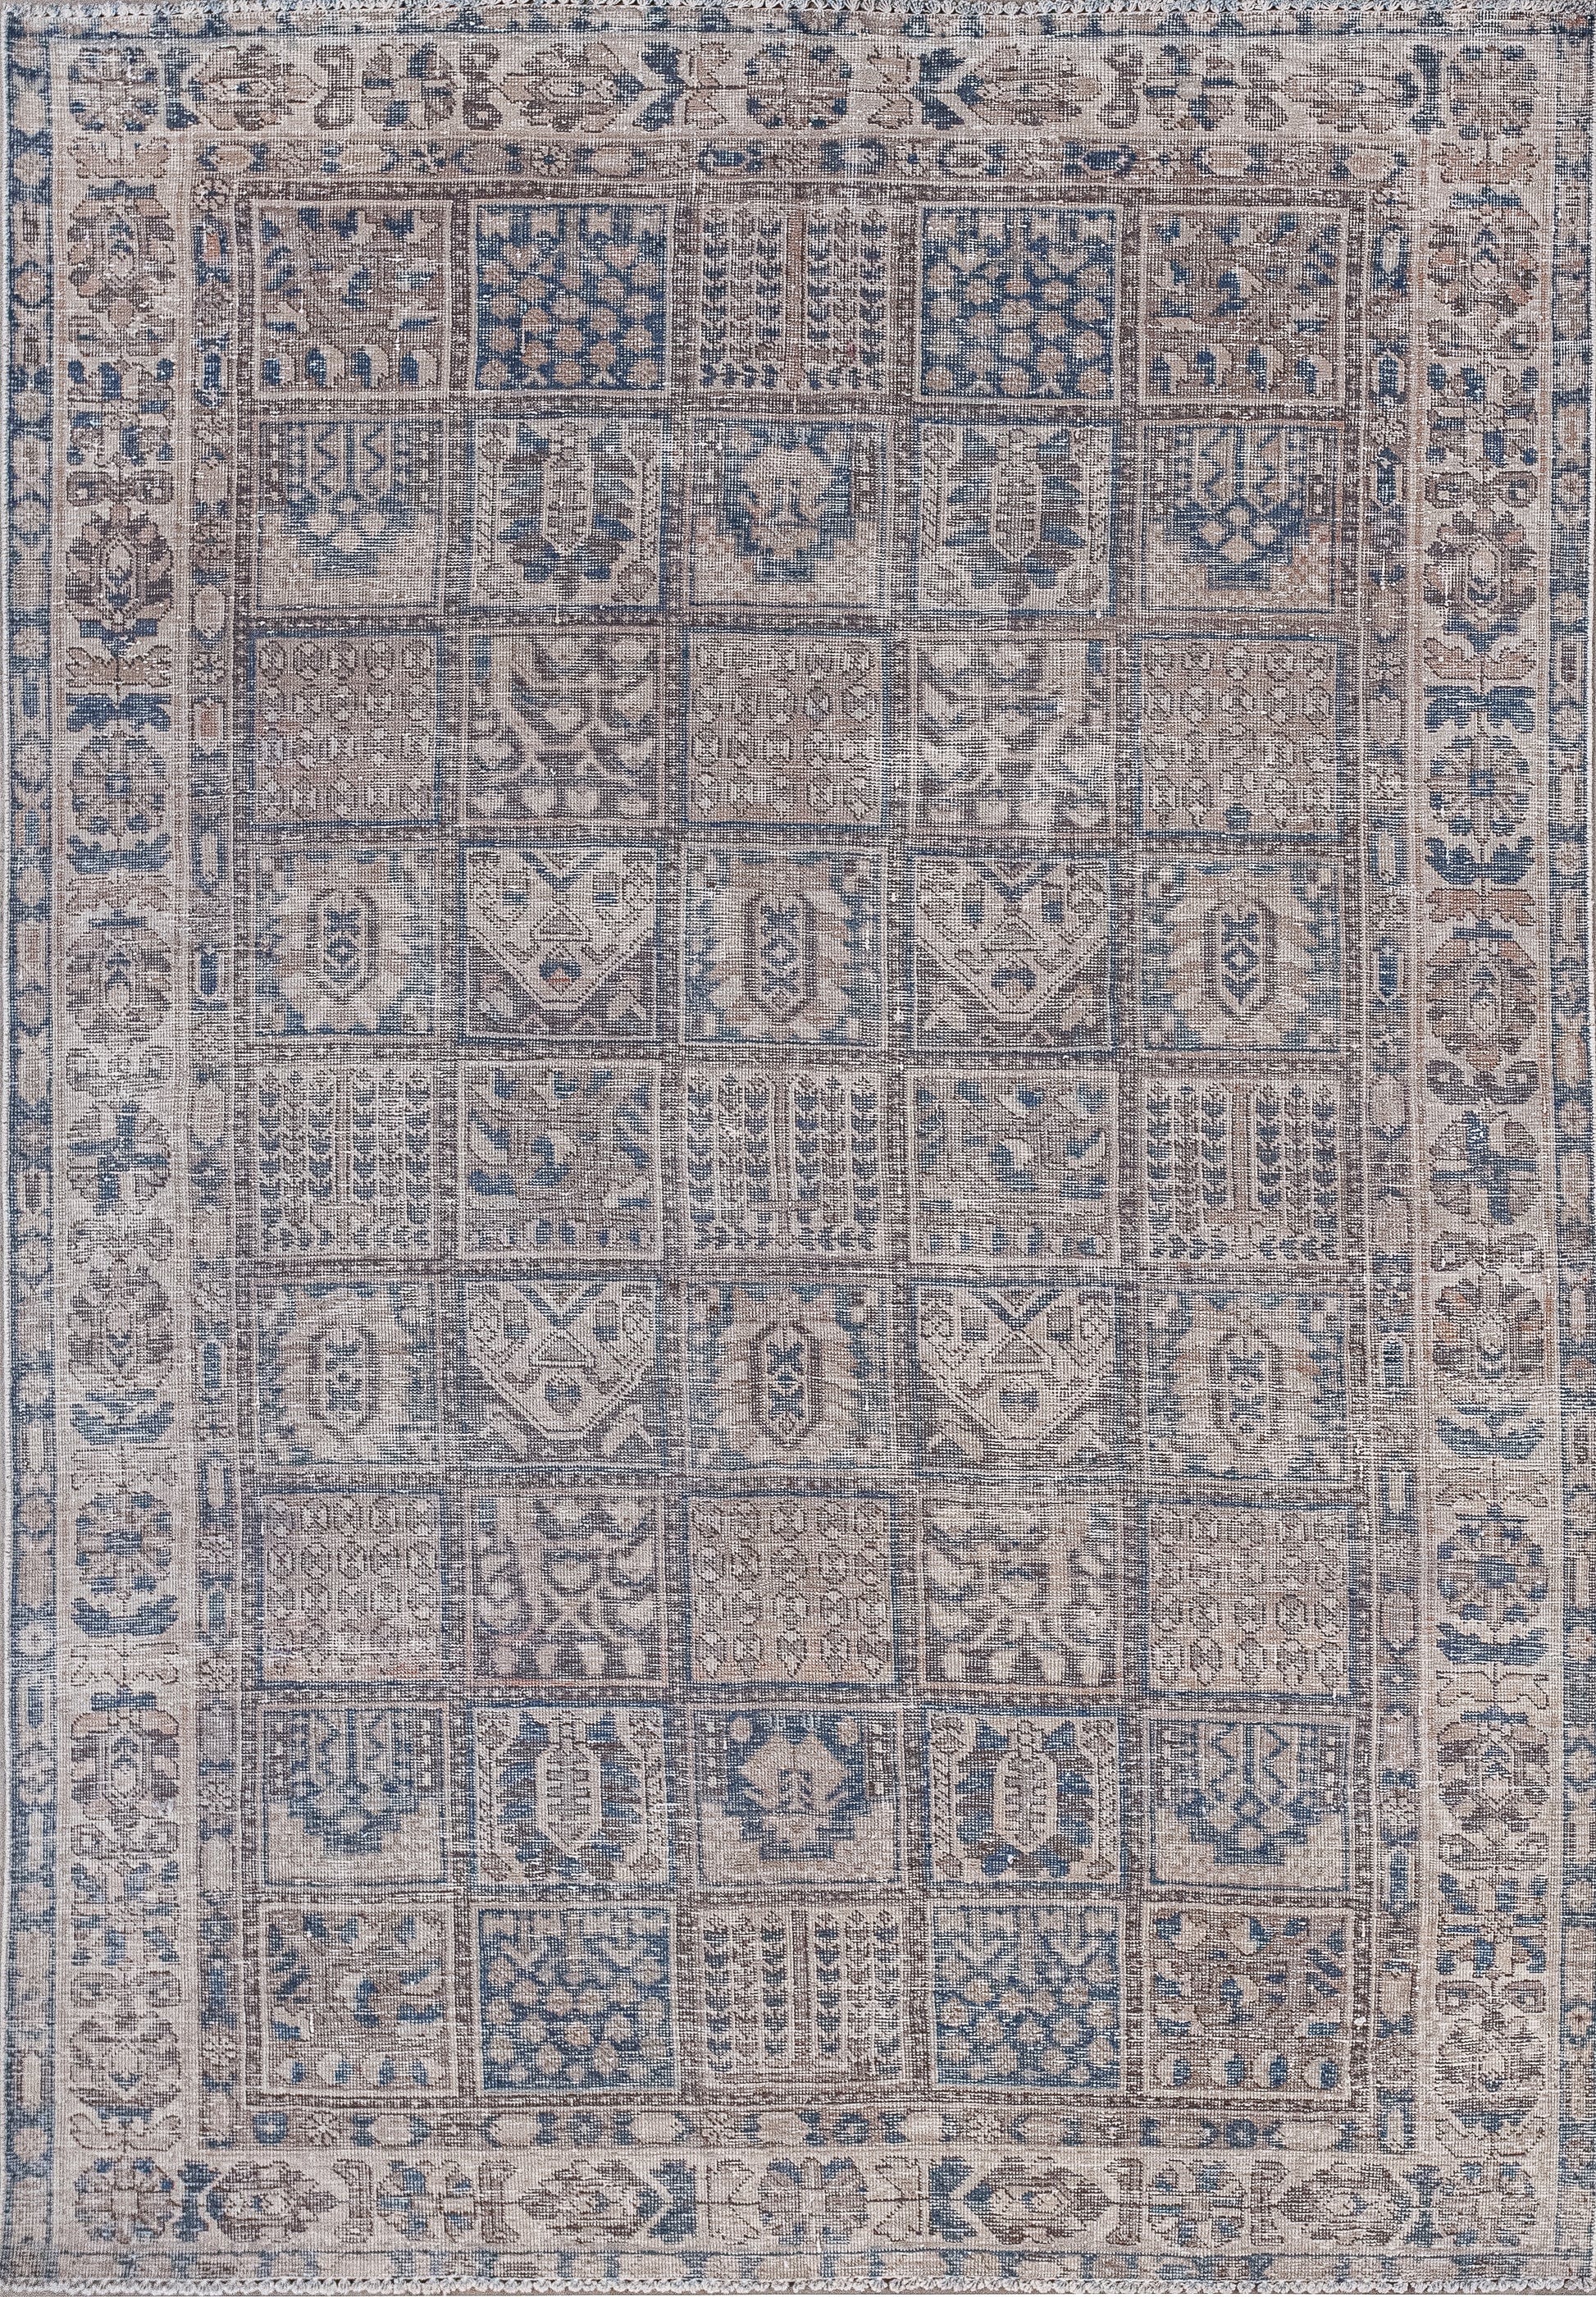 This interesting rug was woven from the tribal symbols of ancient communities. The vintage color scheme has gray, brown, and blue. 